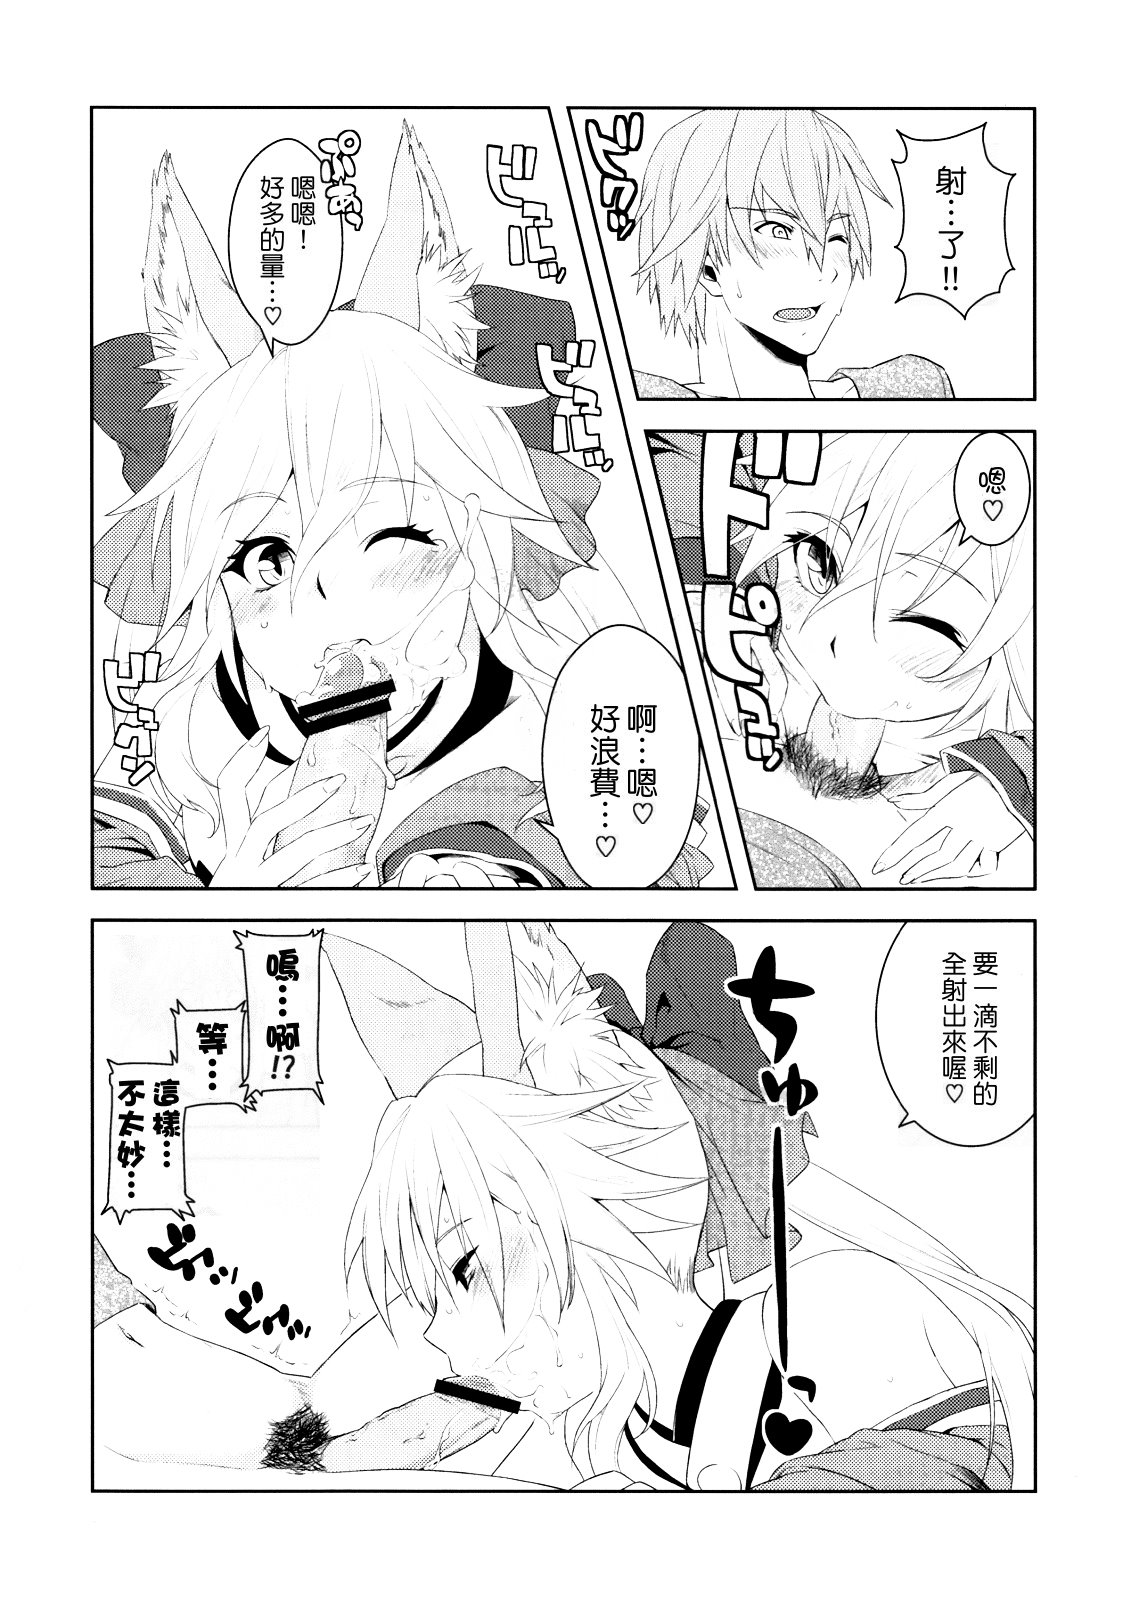 (C79) [X.T.C (Midou Shin)] Fox Extra (Fate/Extra)(Chinese) (C79) [X.T.C (魅堂真)] ふぉっくすえくすとら (Fate/Extra)(清純突破漢化組)